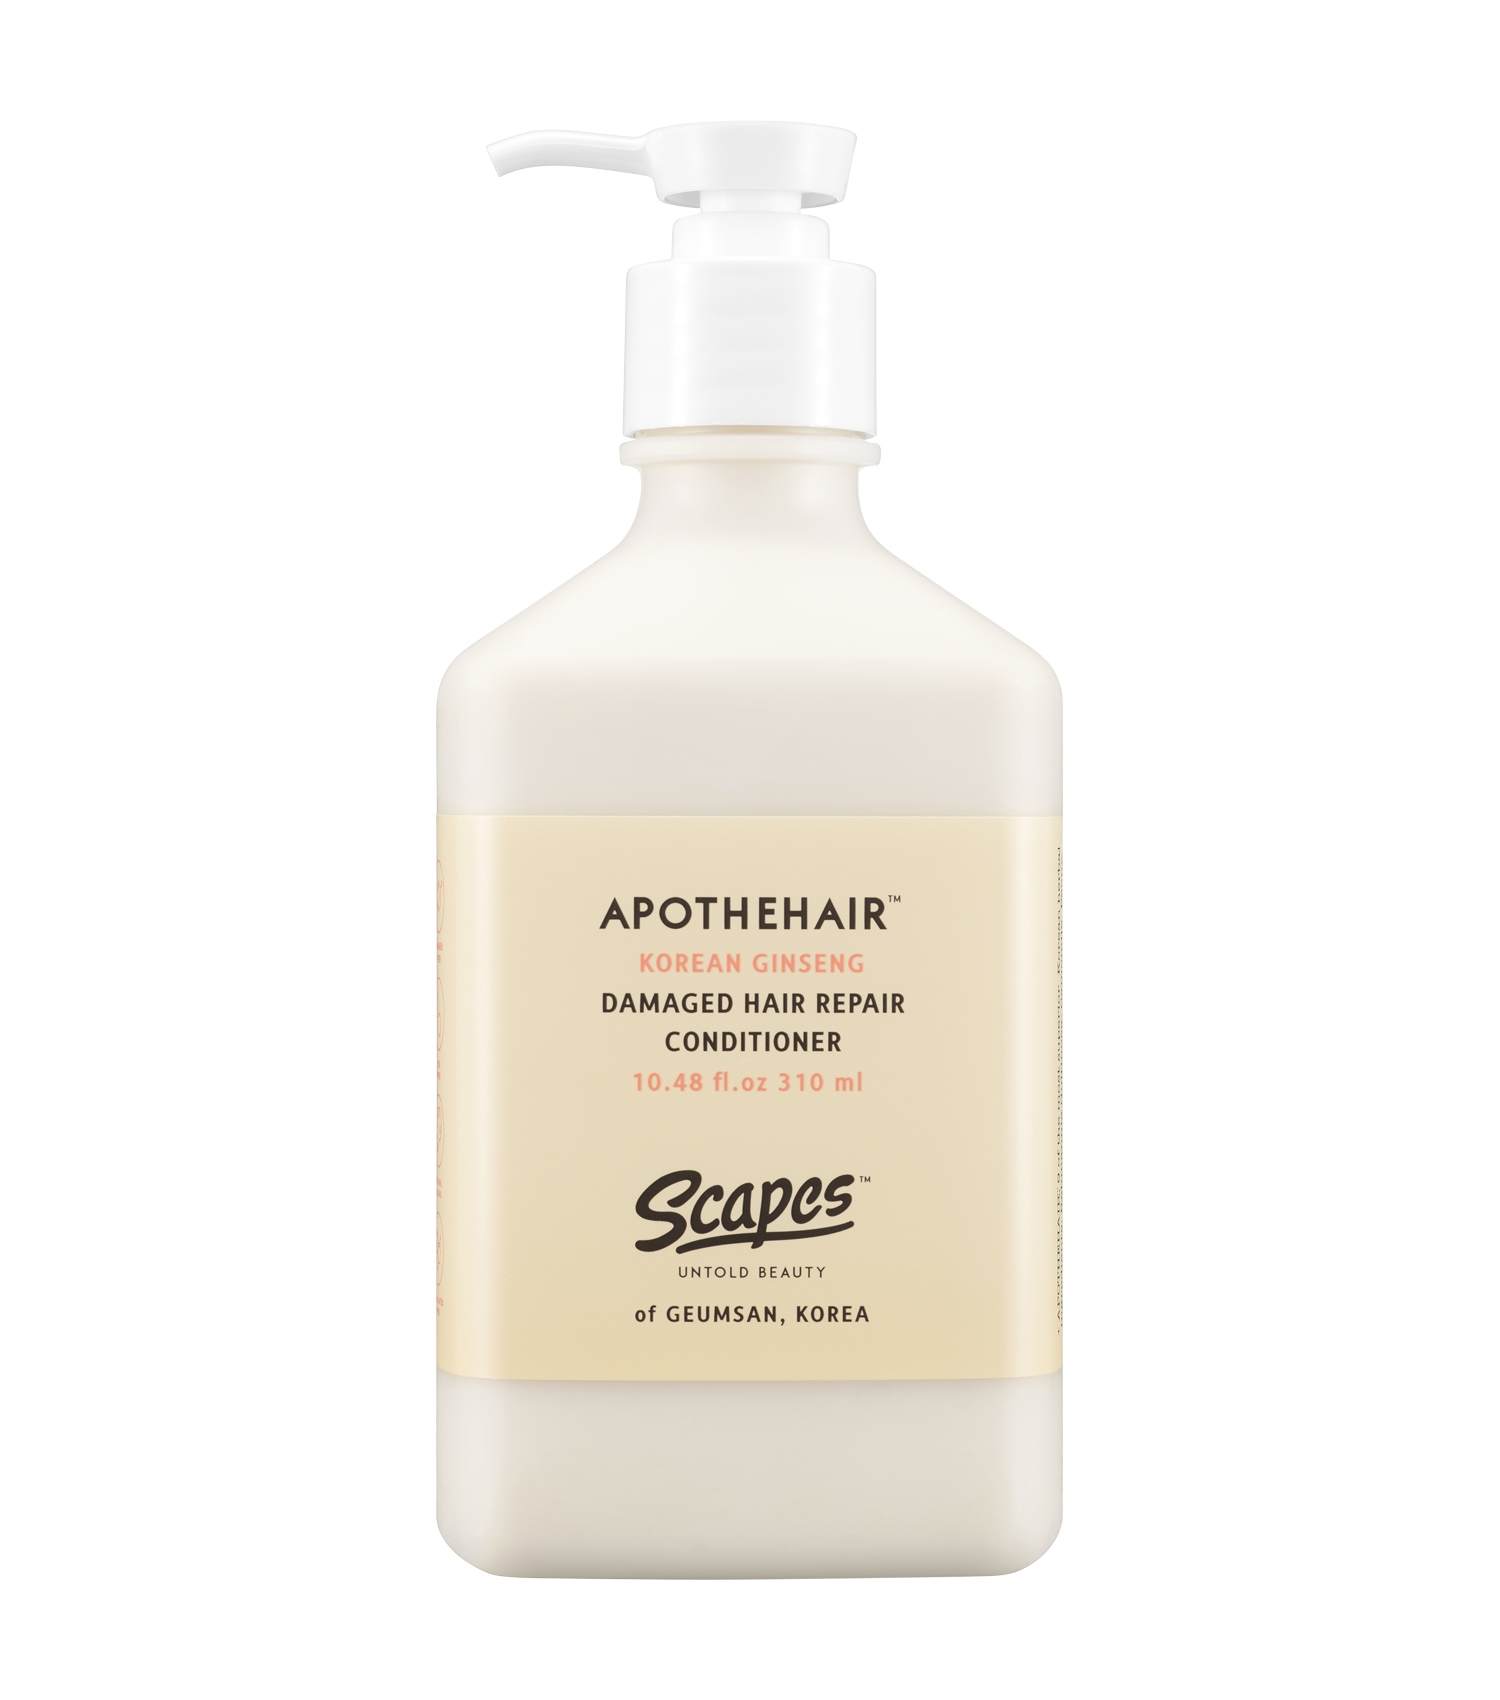 Scapes Apothehair Damaged Hair Repair Conditioner